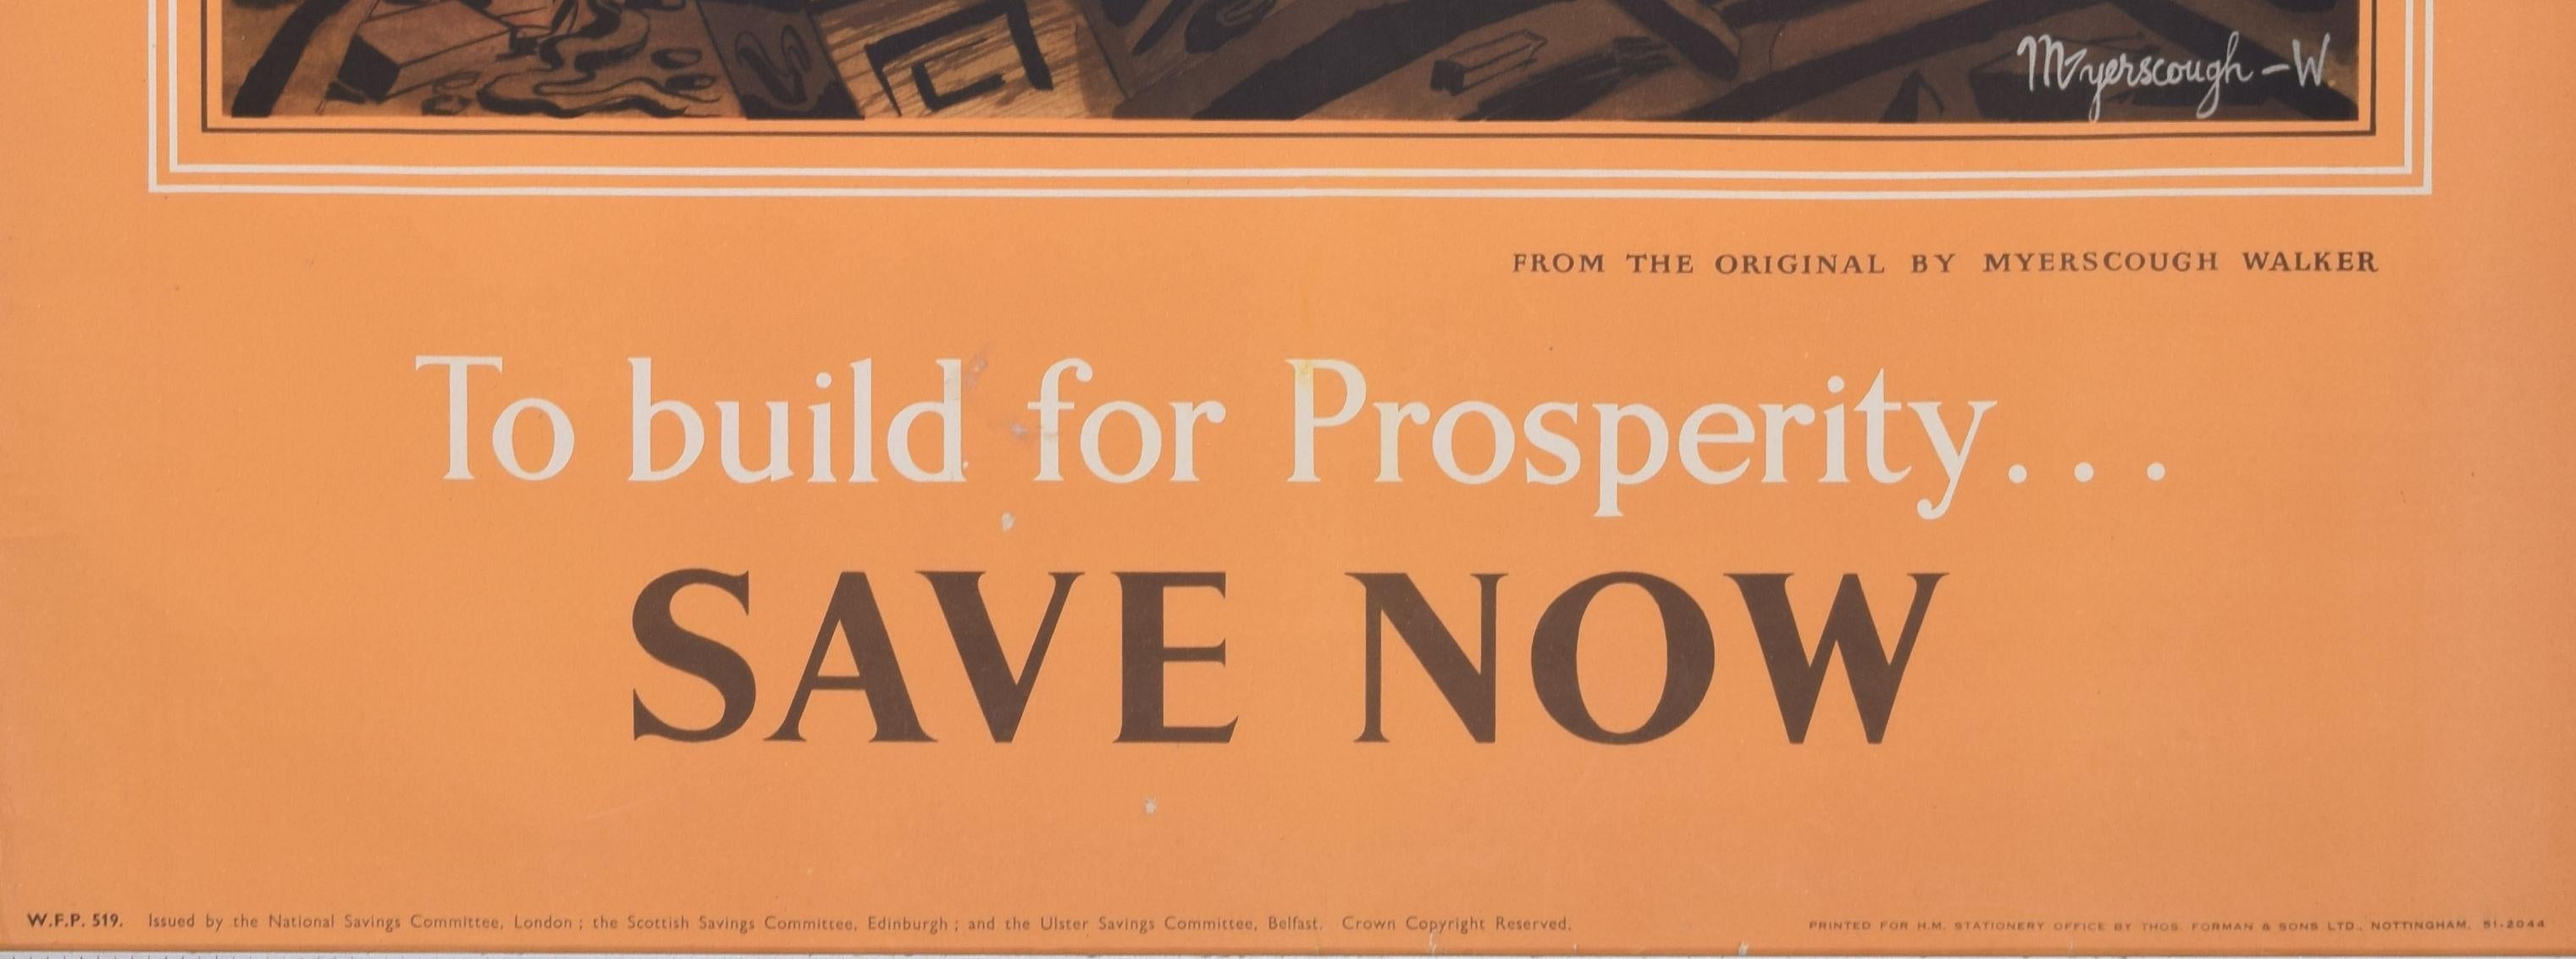 To Build for Prosperity - Save Now original poster by Raymond Myerscough Walker For Sale 4